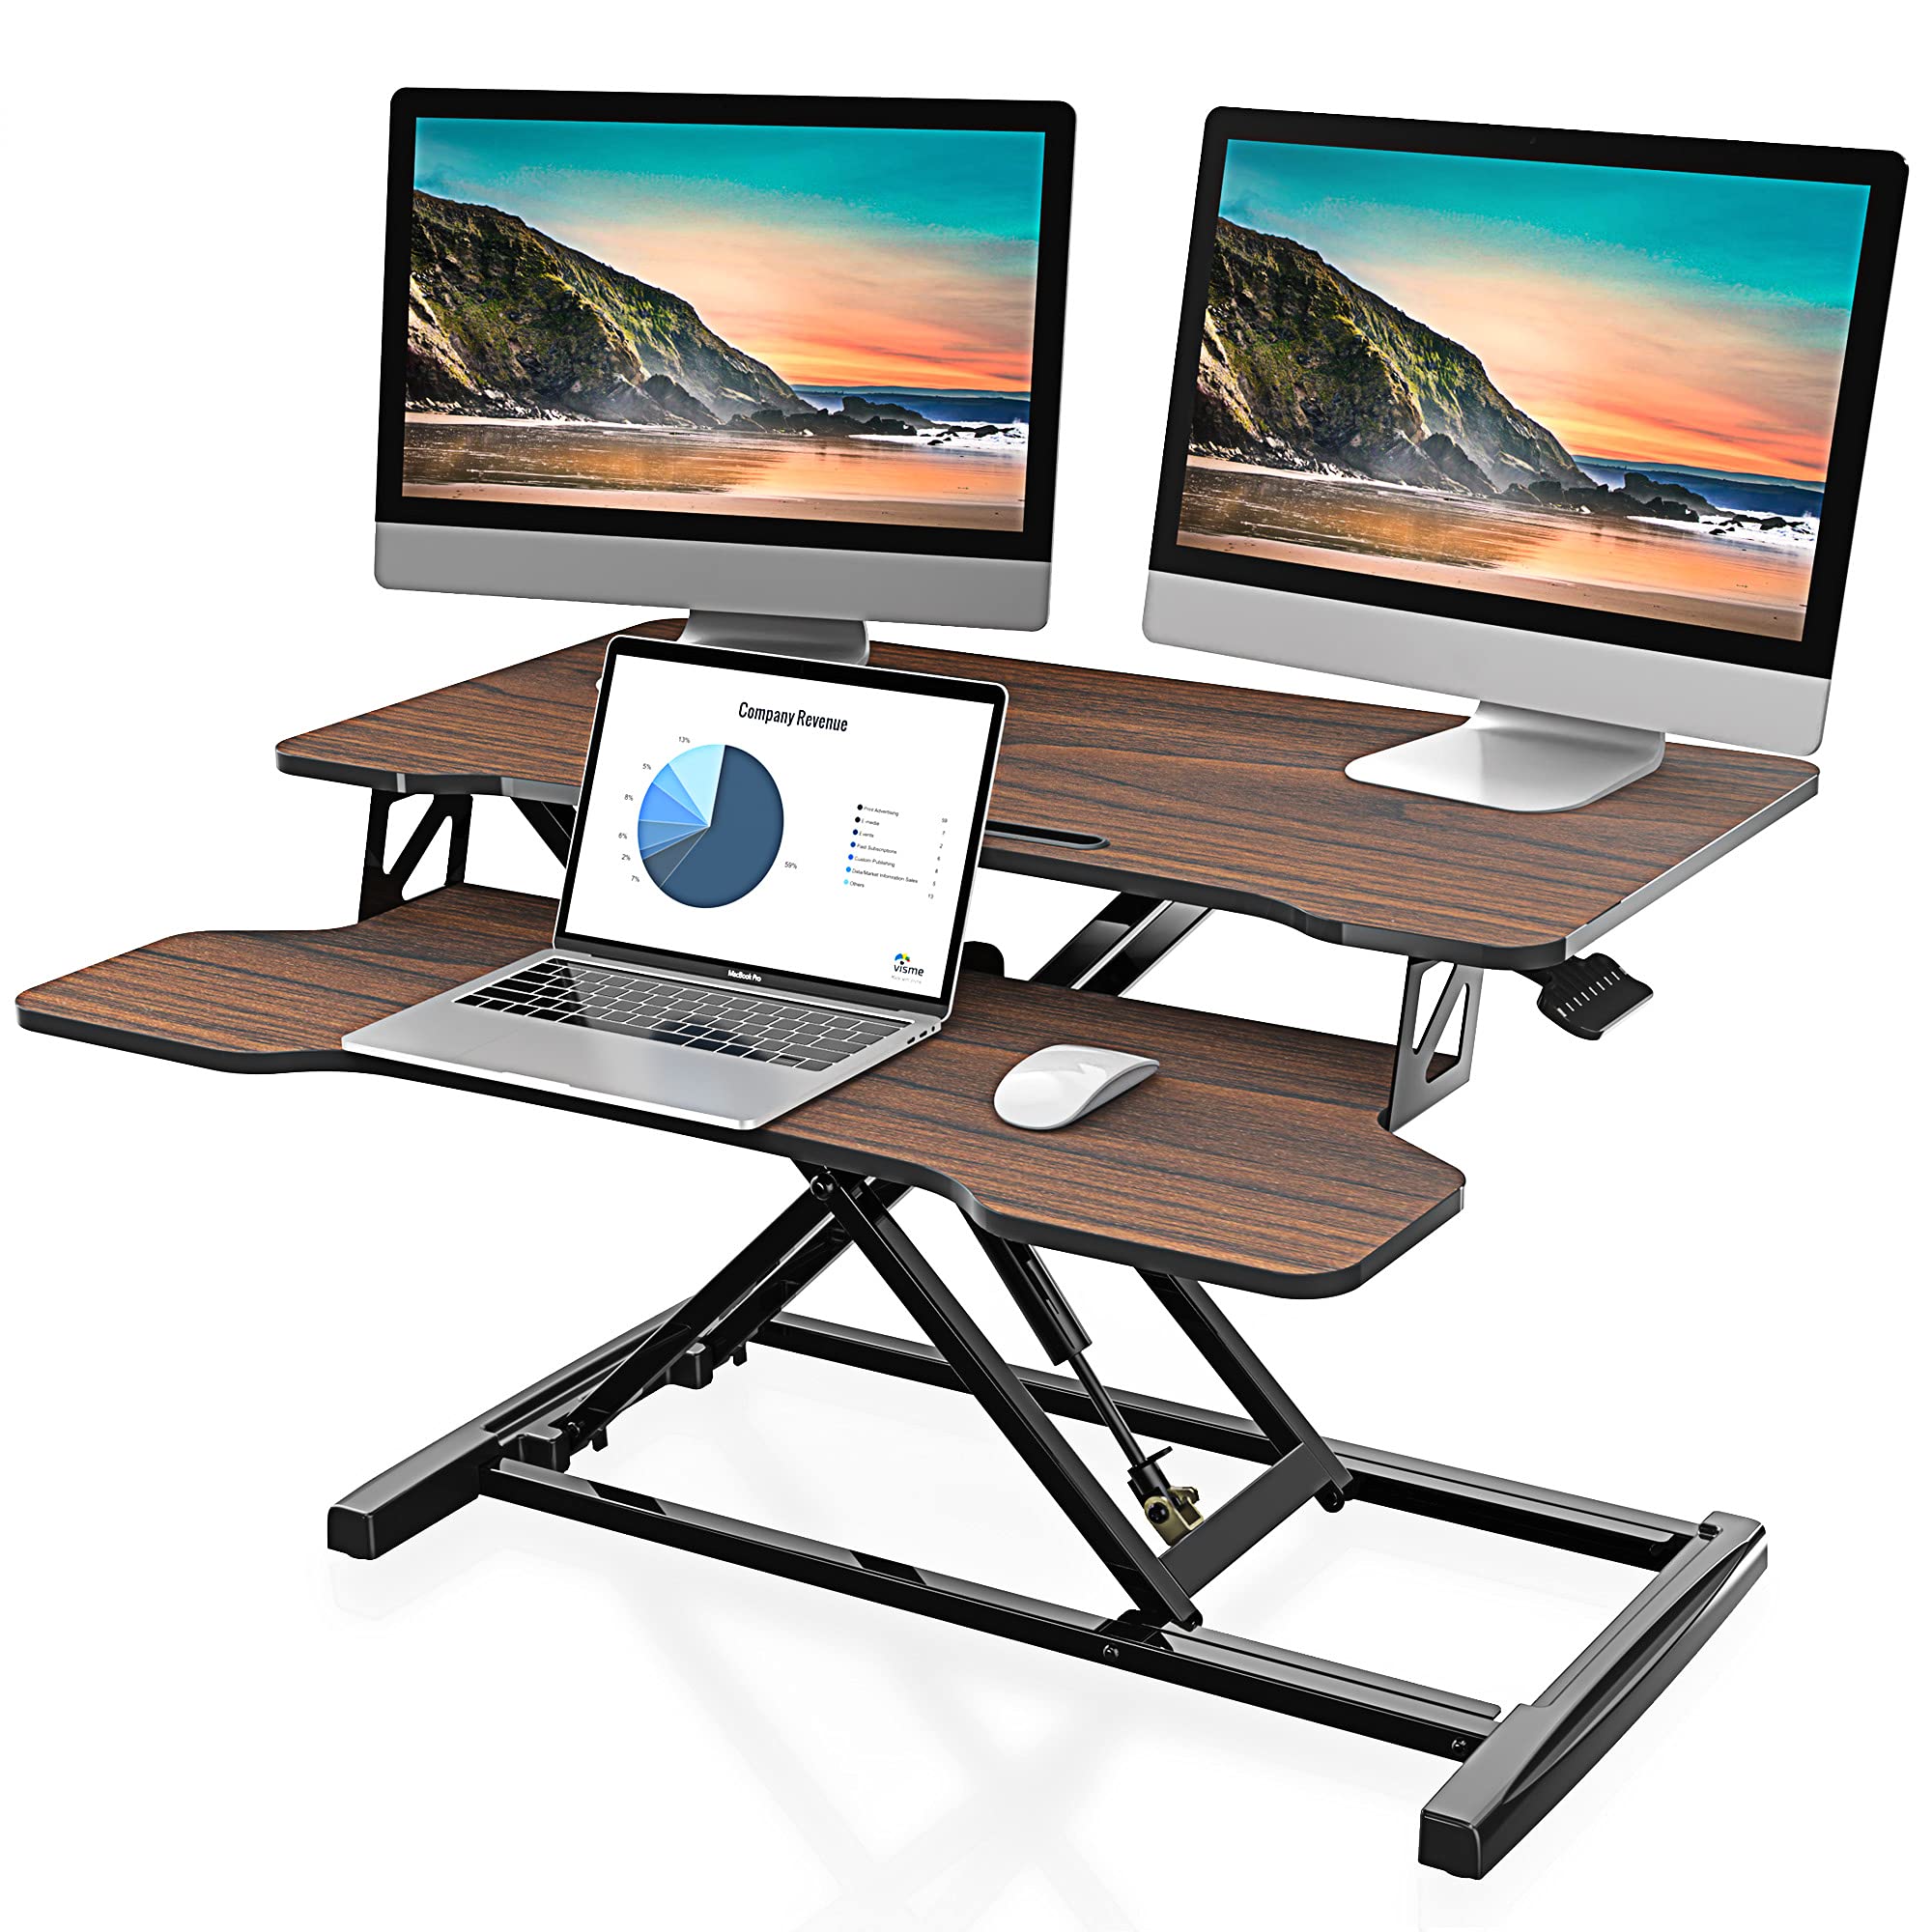 FITUEYES Height Adjustable Standing Desk Converter 32” Wide Sit to Stand Desk Tabletop Workstation,Brown,SD308002WE